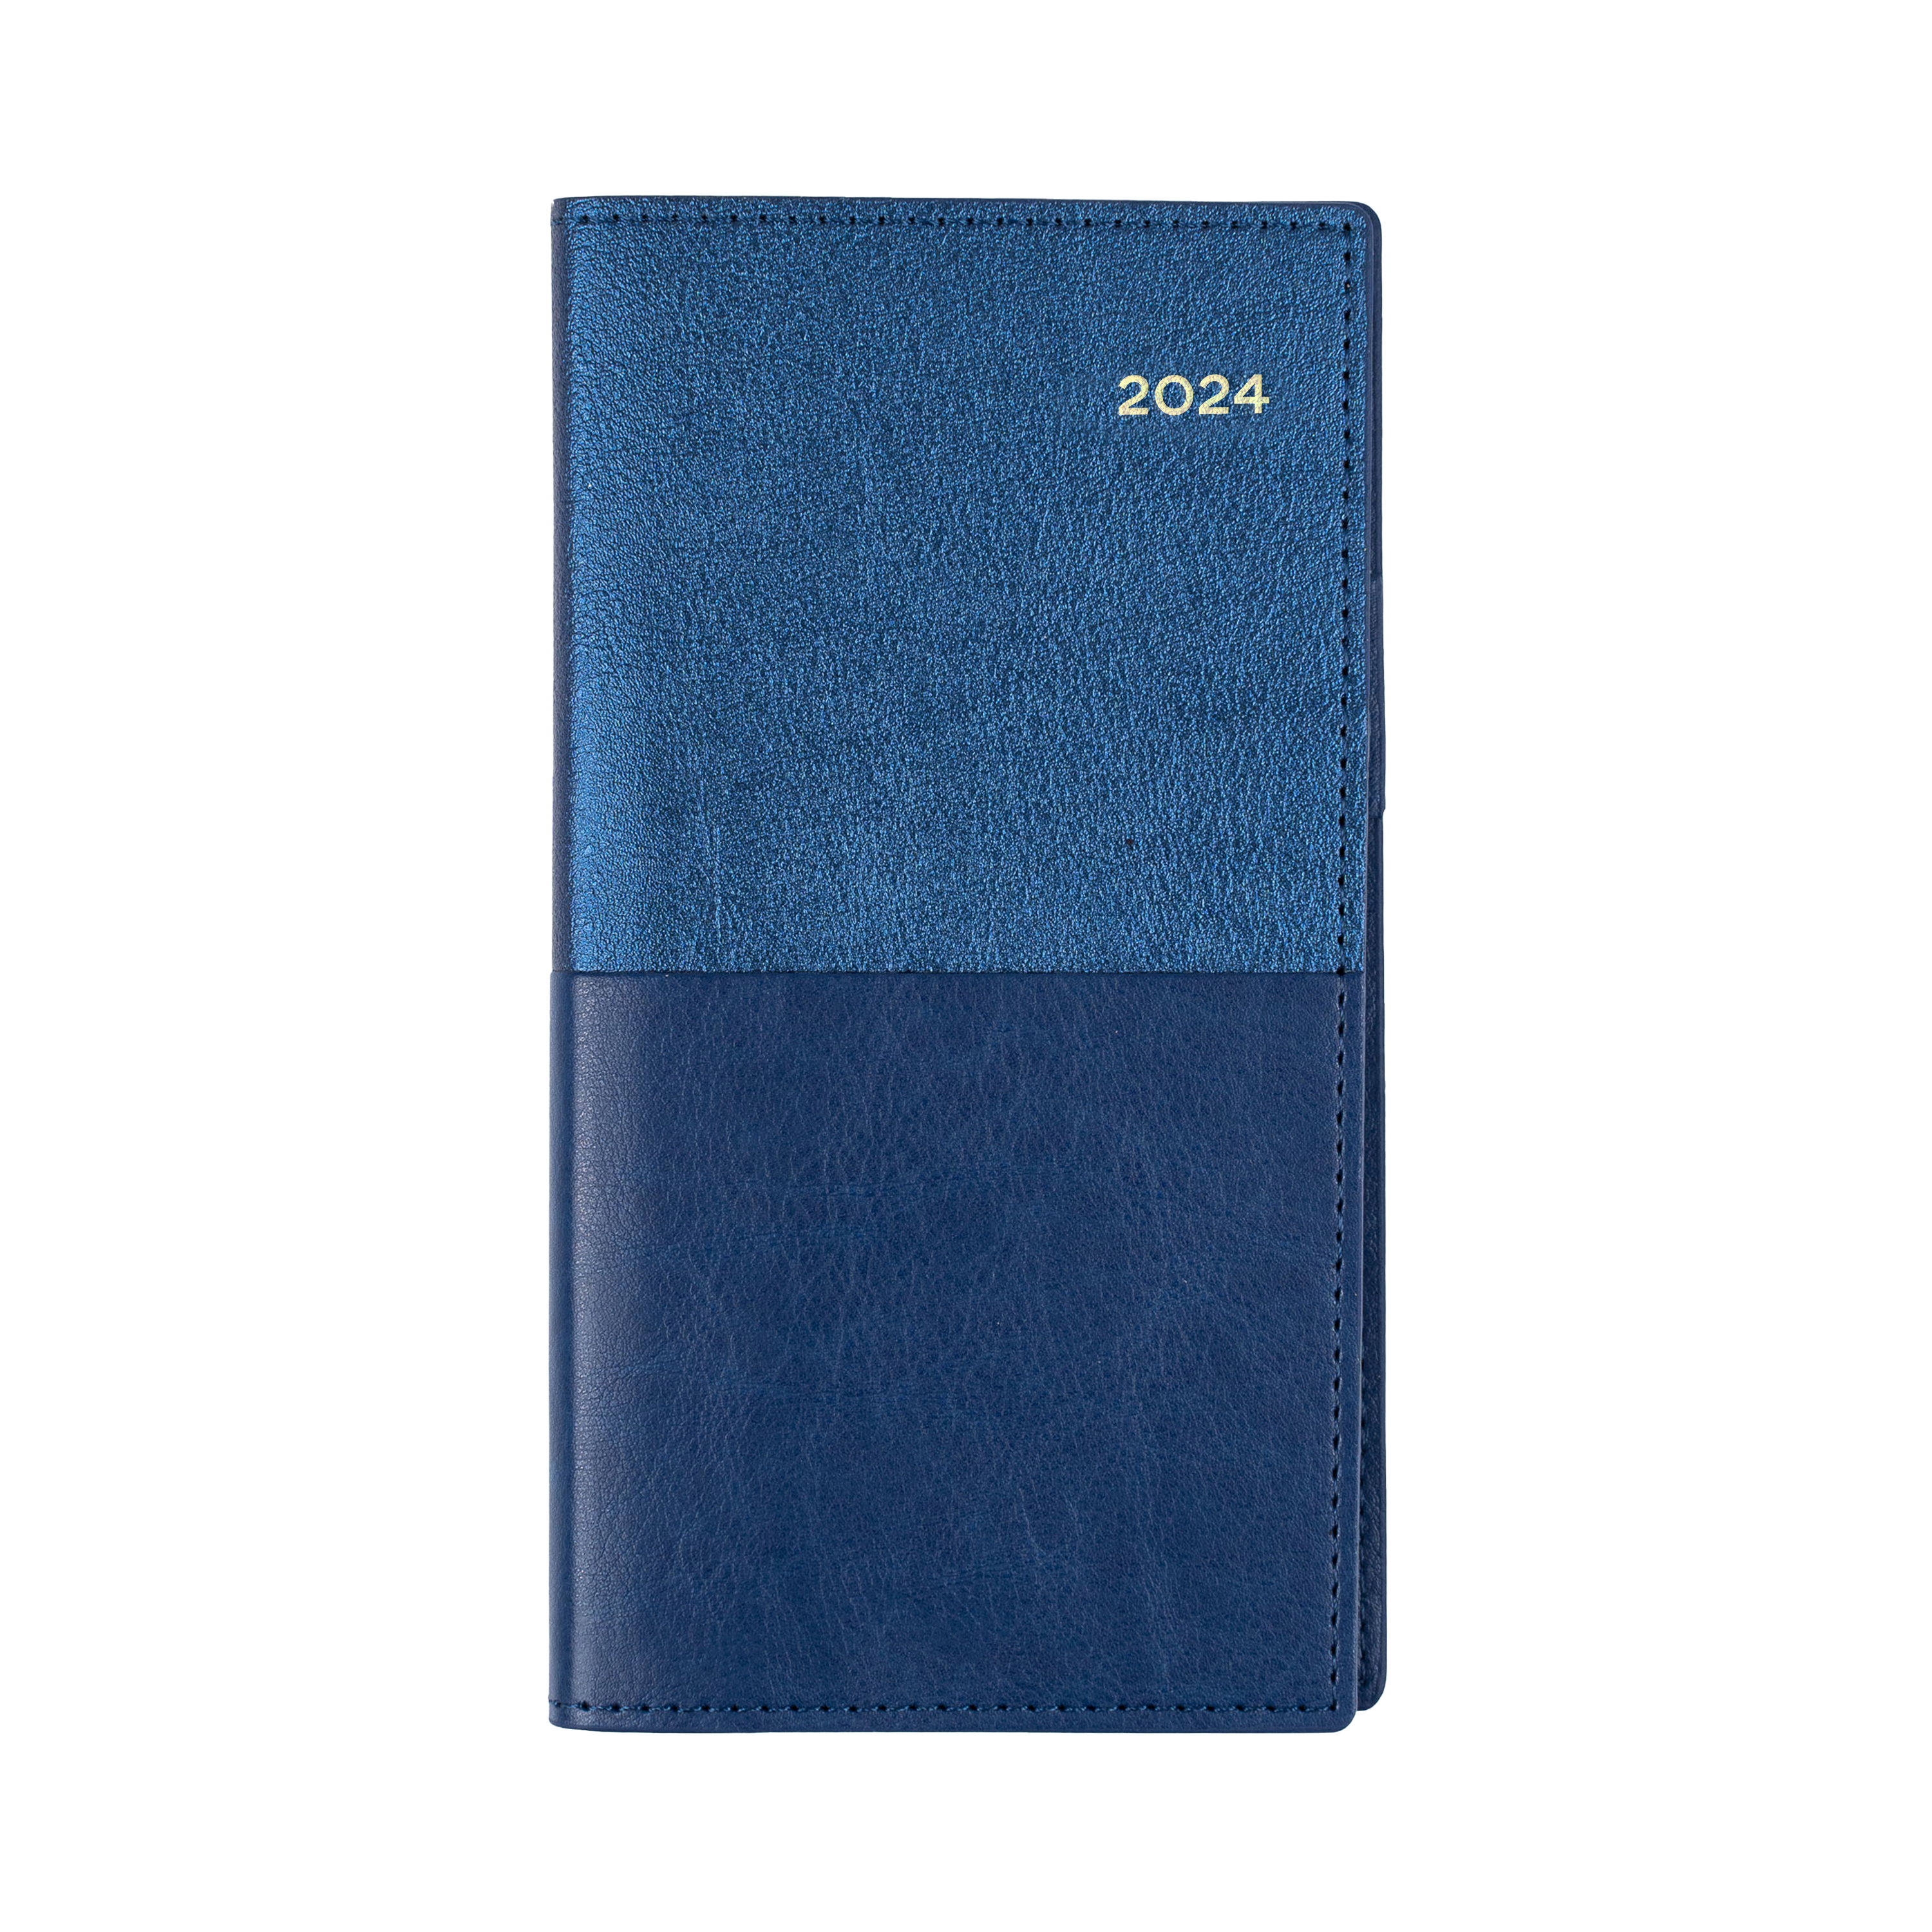 Collins Vanessa 2024 Diary - Week to View (Landscape)